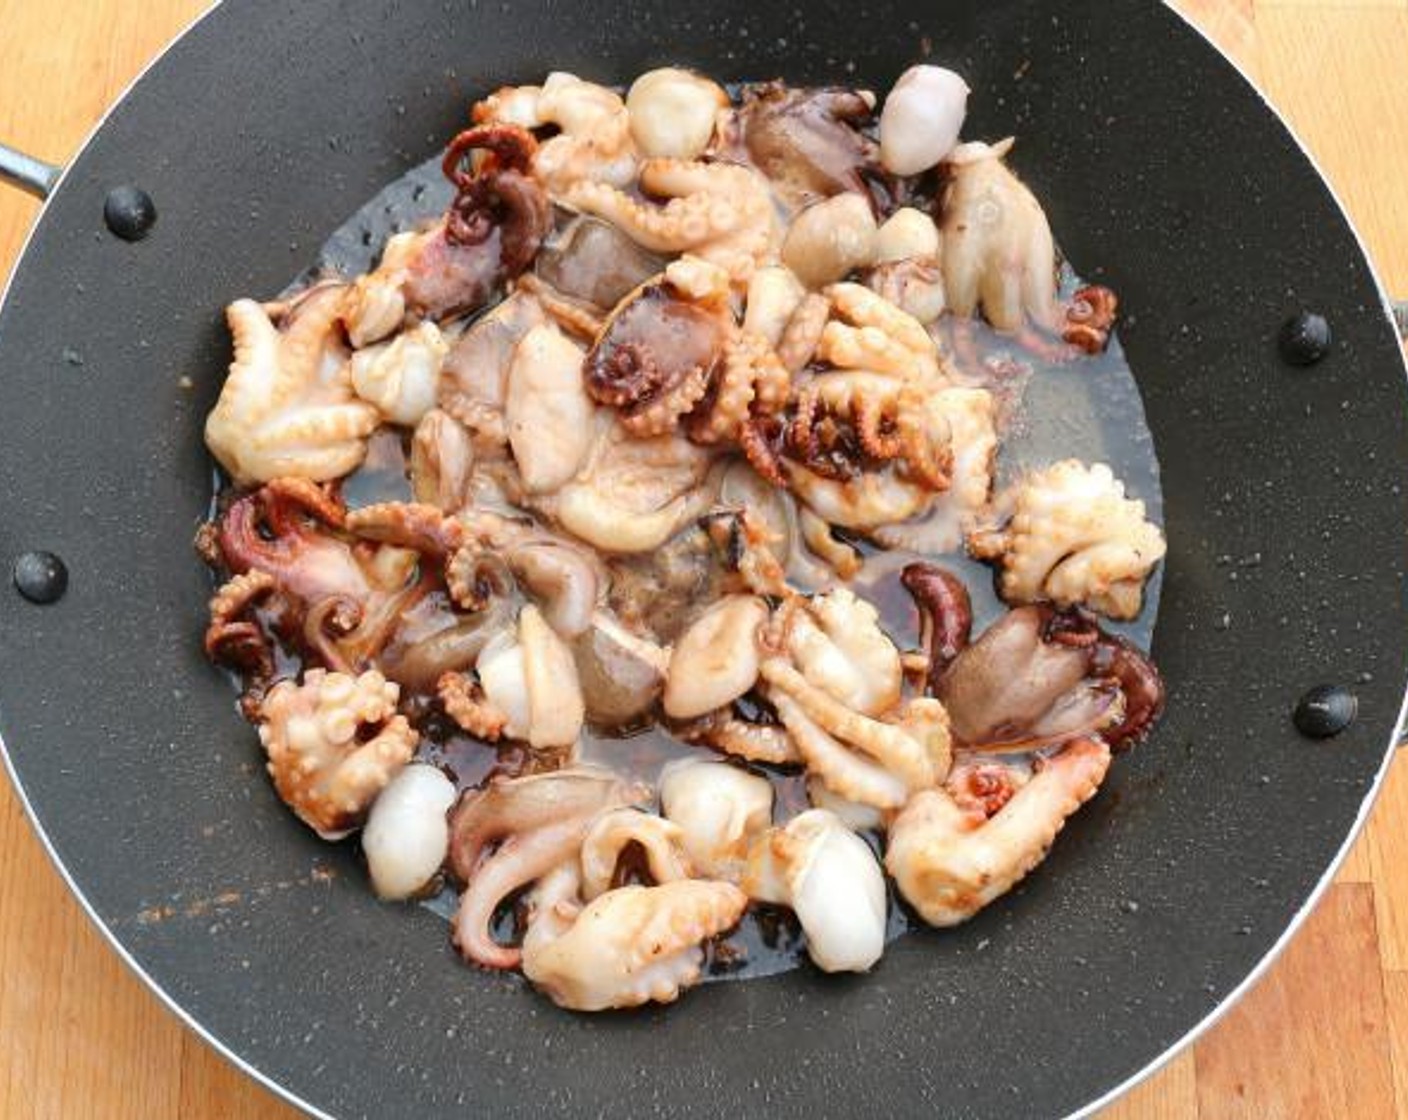 step 5 Stir fry the baby octopus in VERY HOT Peanut Oil (1 cup) for 1 minute, remove with a slotted spoon to a thick layer of absorbent paper, discard all but 1 tablespoon of the remaining peanut oil.